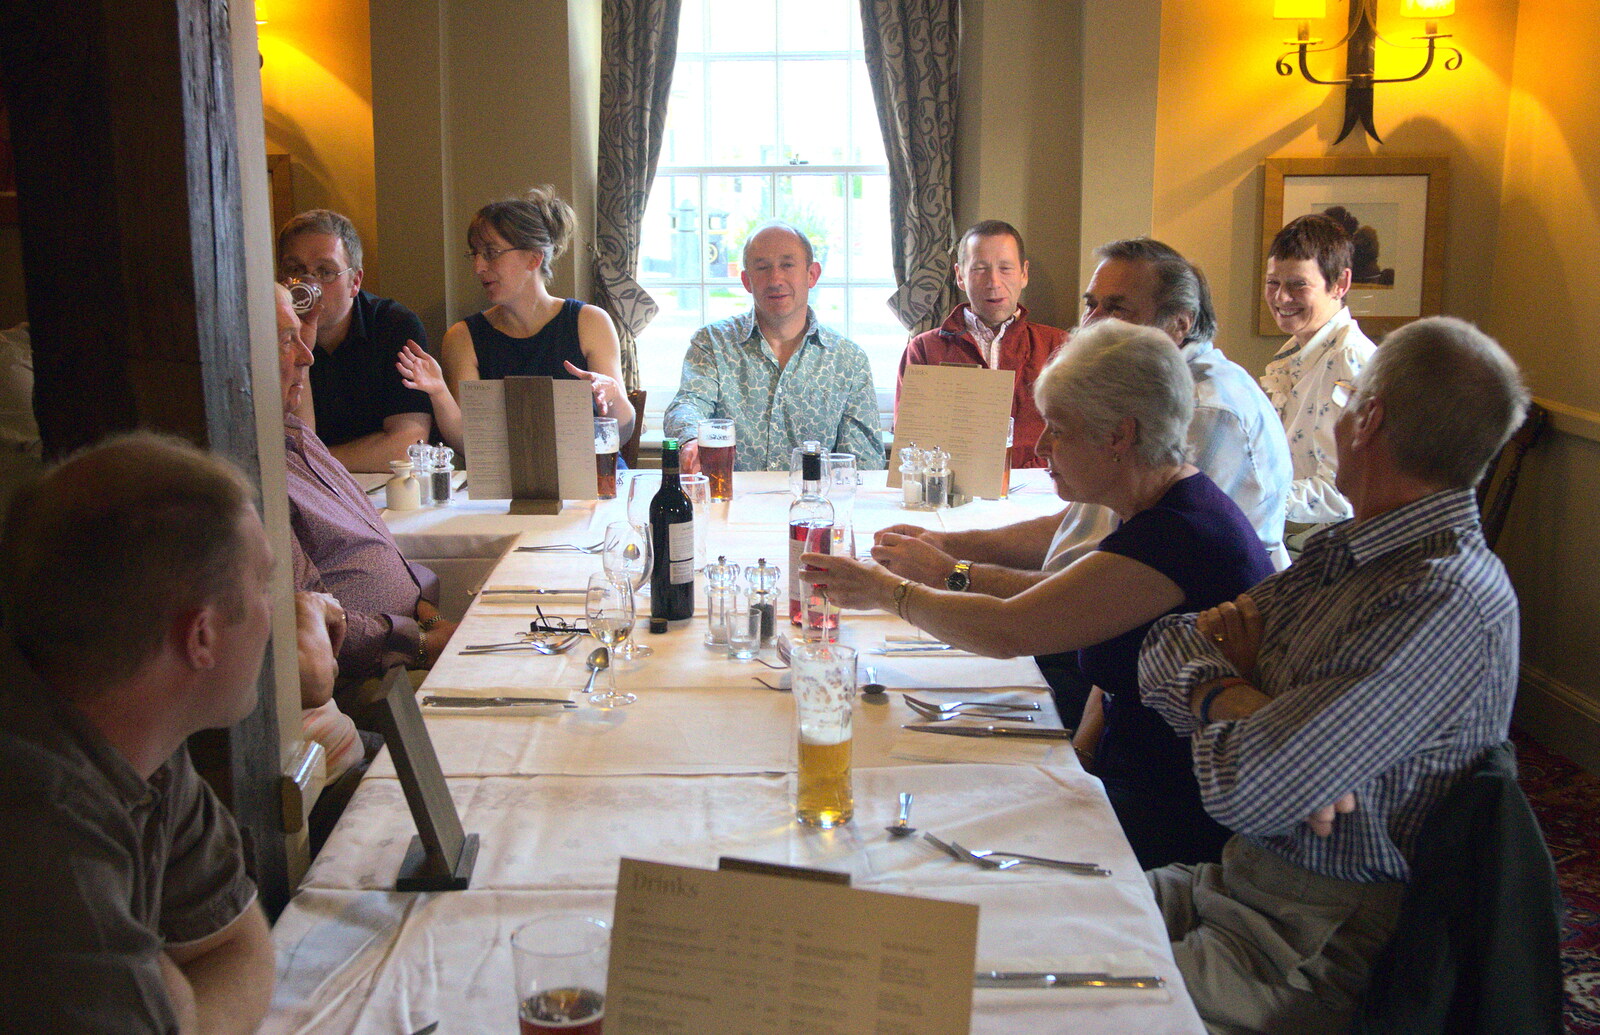 DH at the head of the table from The BSCC Cycling Weekend, The Swan Inn, Thaxted, Essex - 12th May 2012